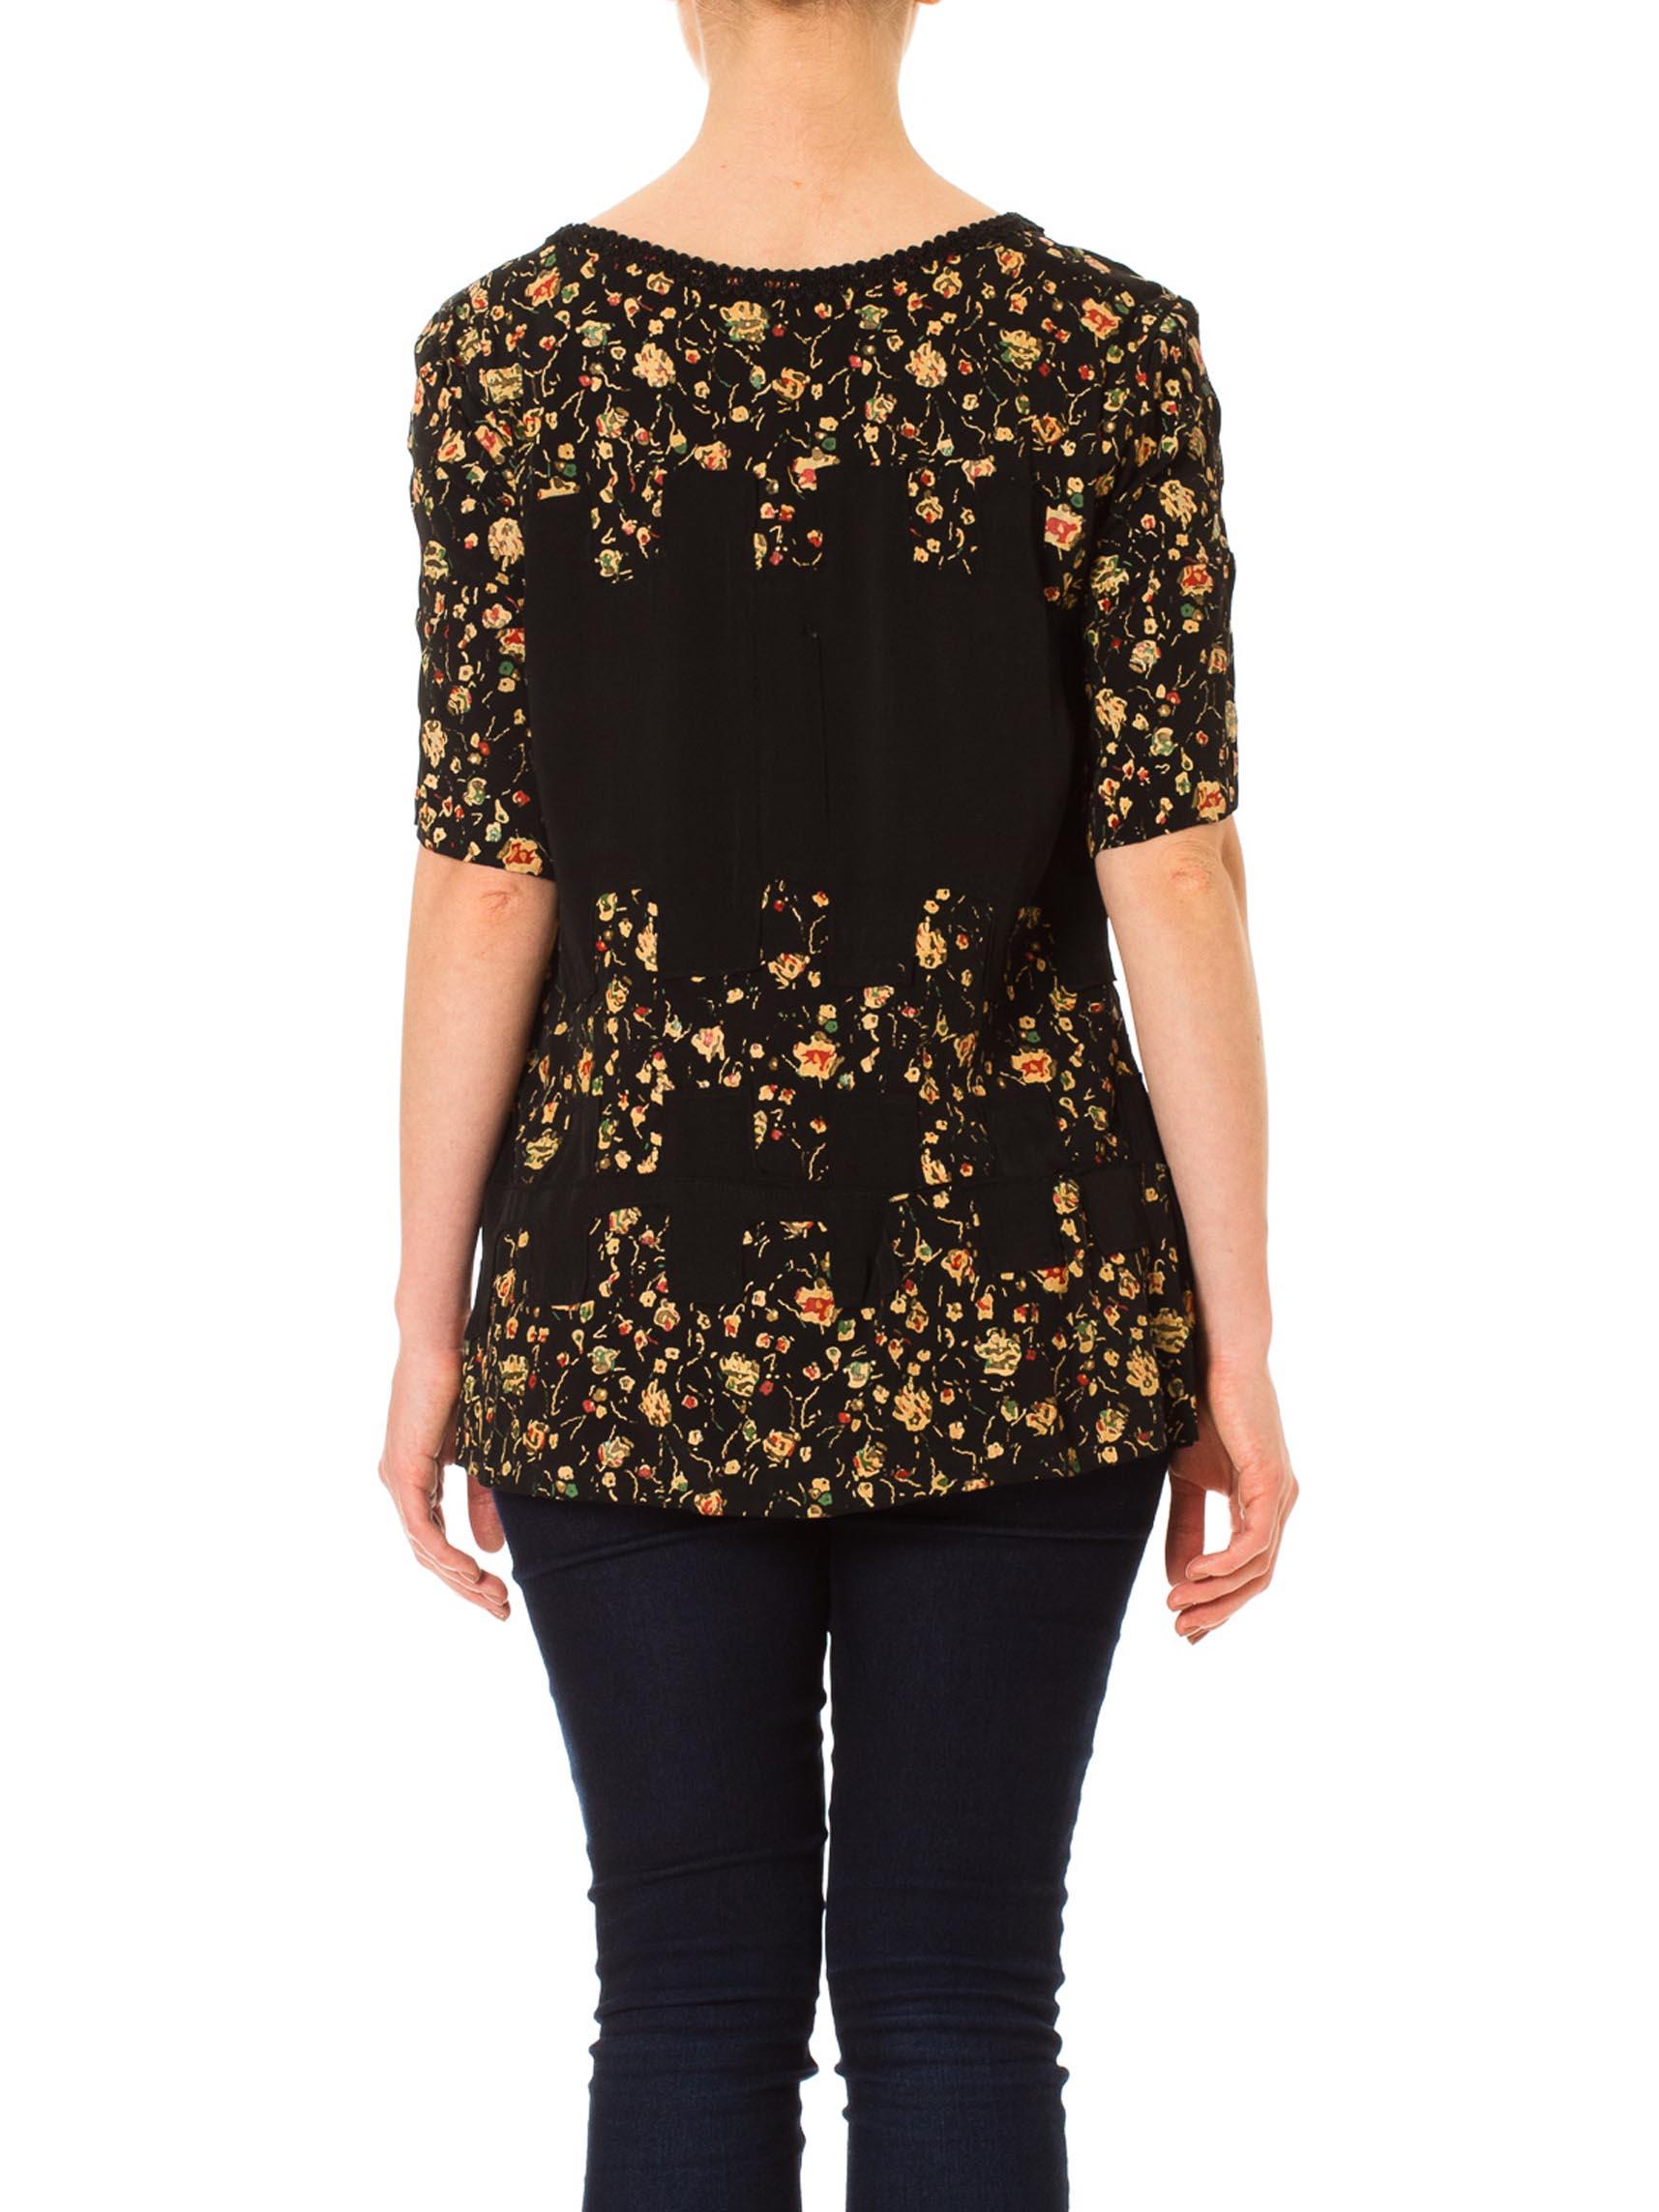 1920S Black Hand Painted Rayon Faille Floral Top For Sale 6